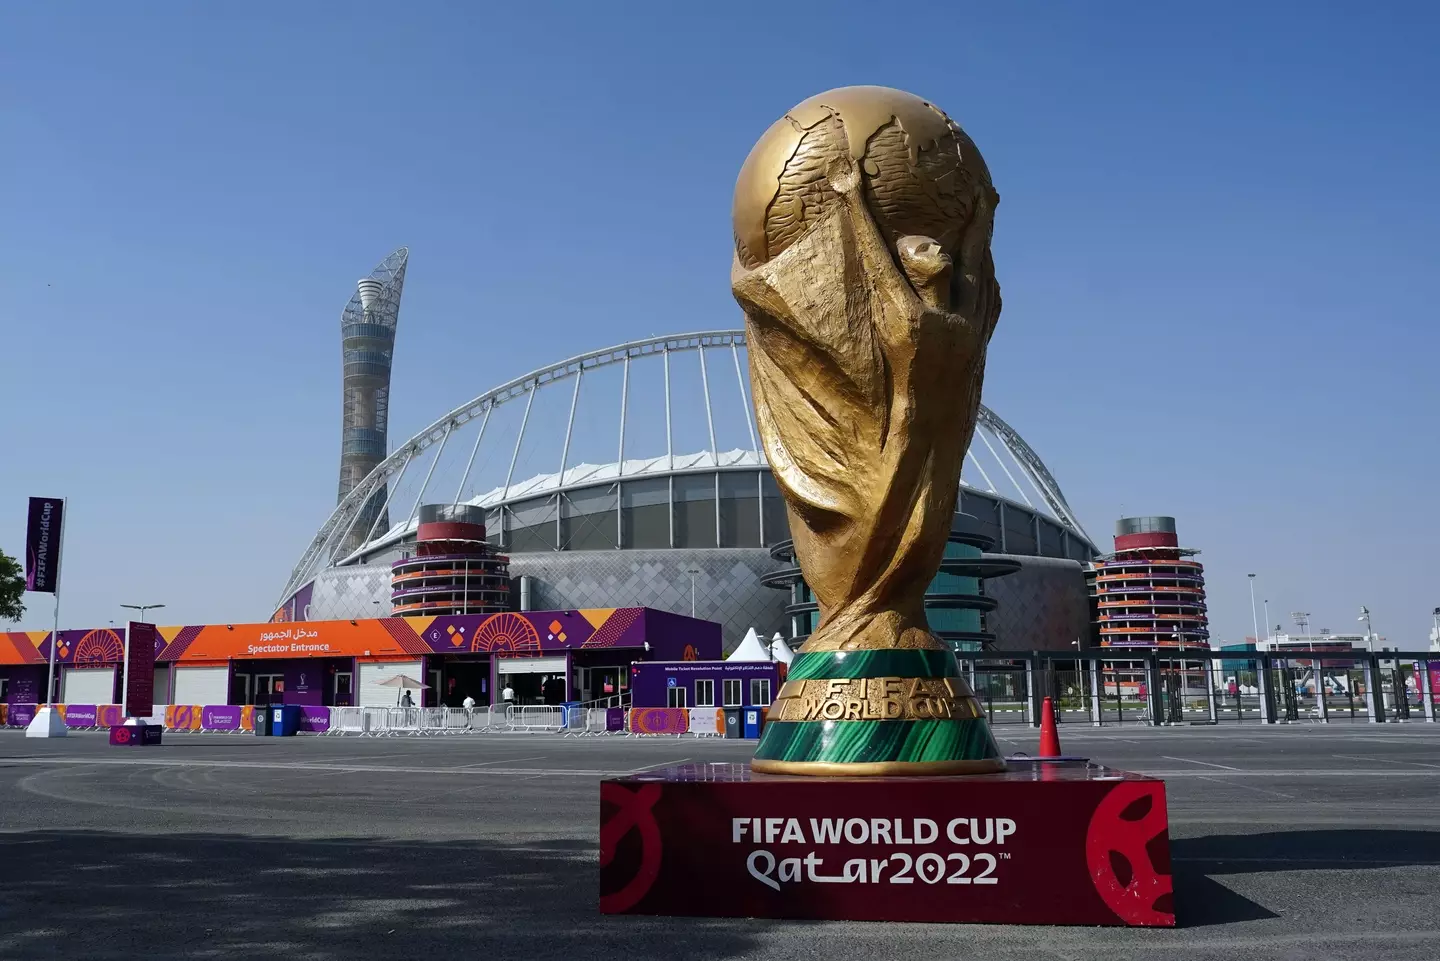 The World Cup being hosted in Qatar has drawn in lots of controversy from around the world.